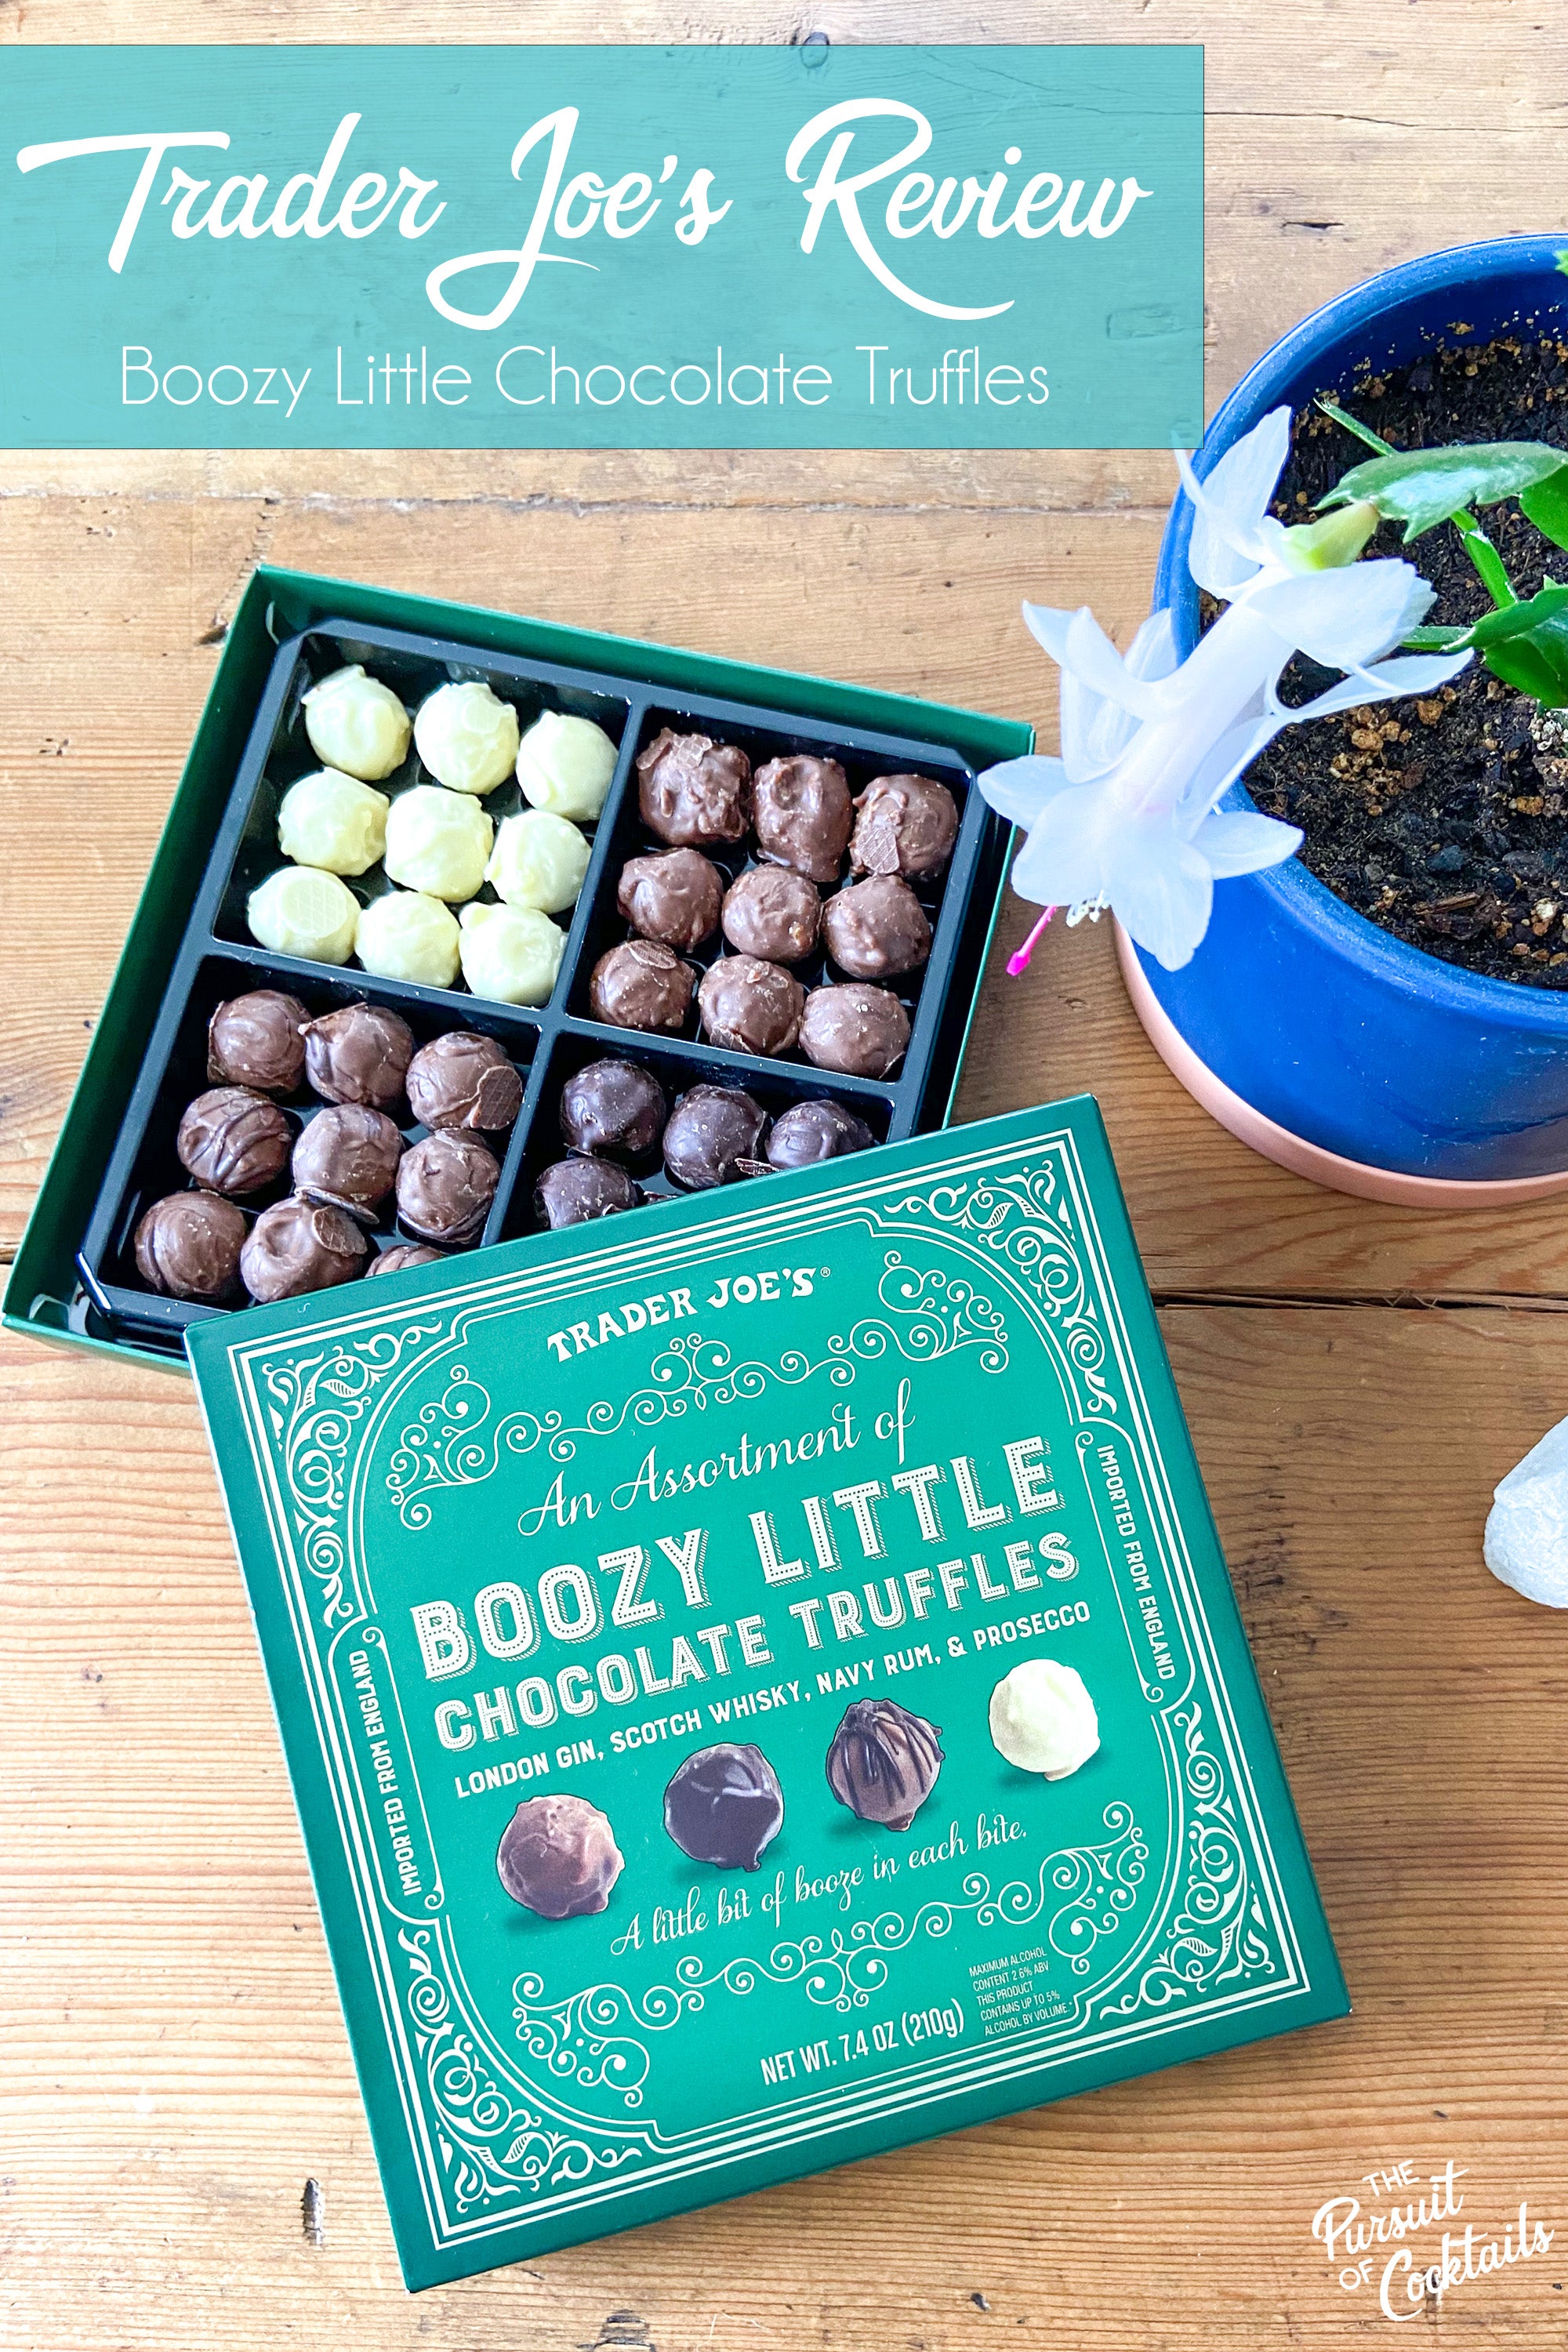 Trader Joe's Review of the Boozy Little Chocolate Truffles by The Pursuit of Cocktails